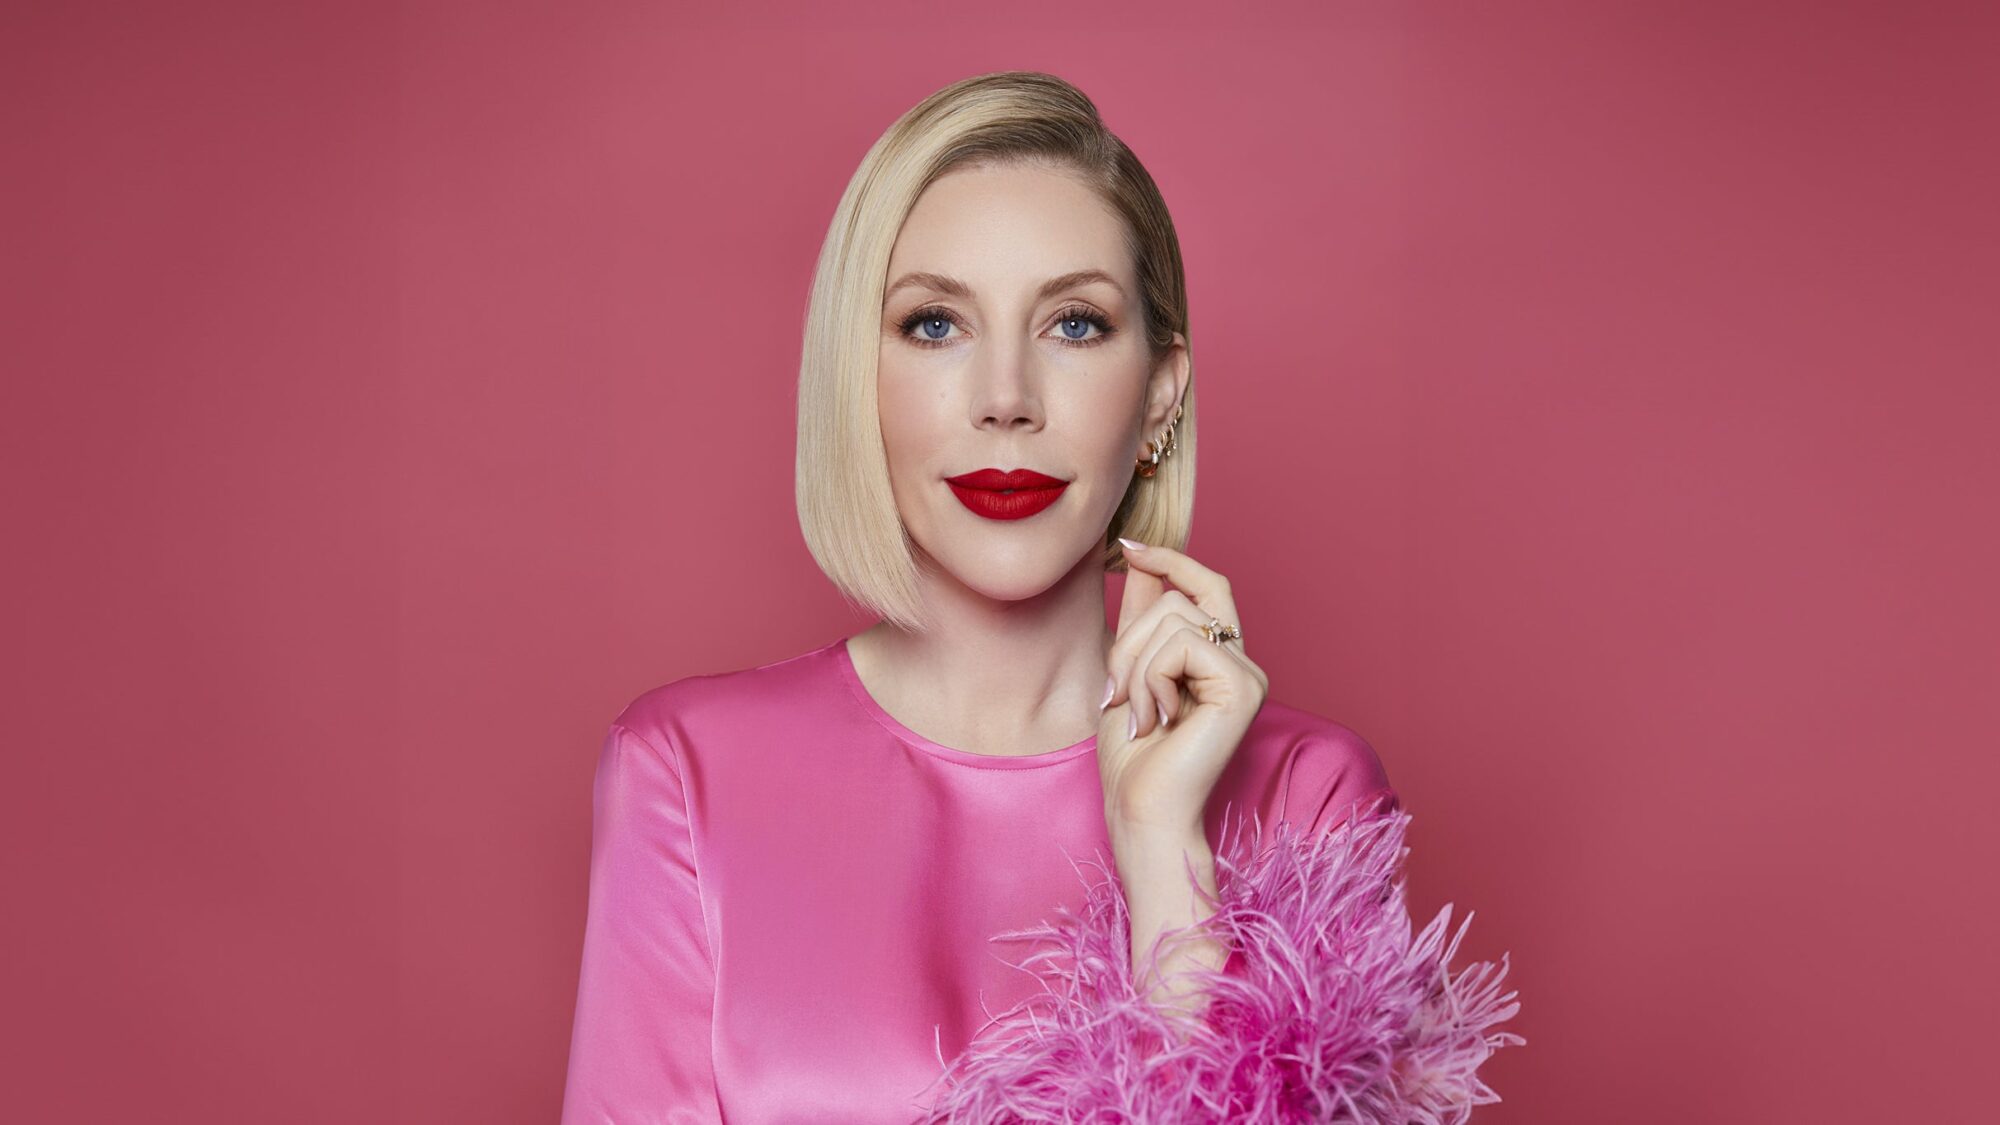 Image name Katherine Ryan Battleaxe at Doncaster Dome Doncaster the 1 image from the post Katherine Ryan: Battleaxe at York Barbican, York in Yorkshire.com.